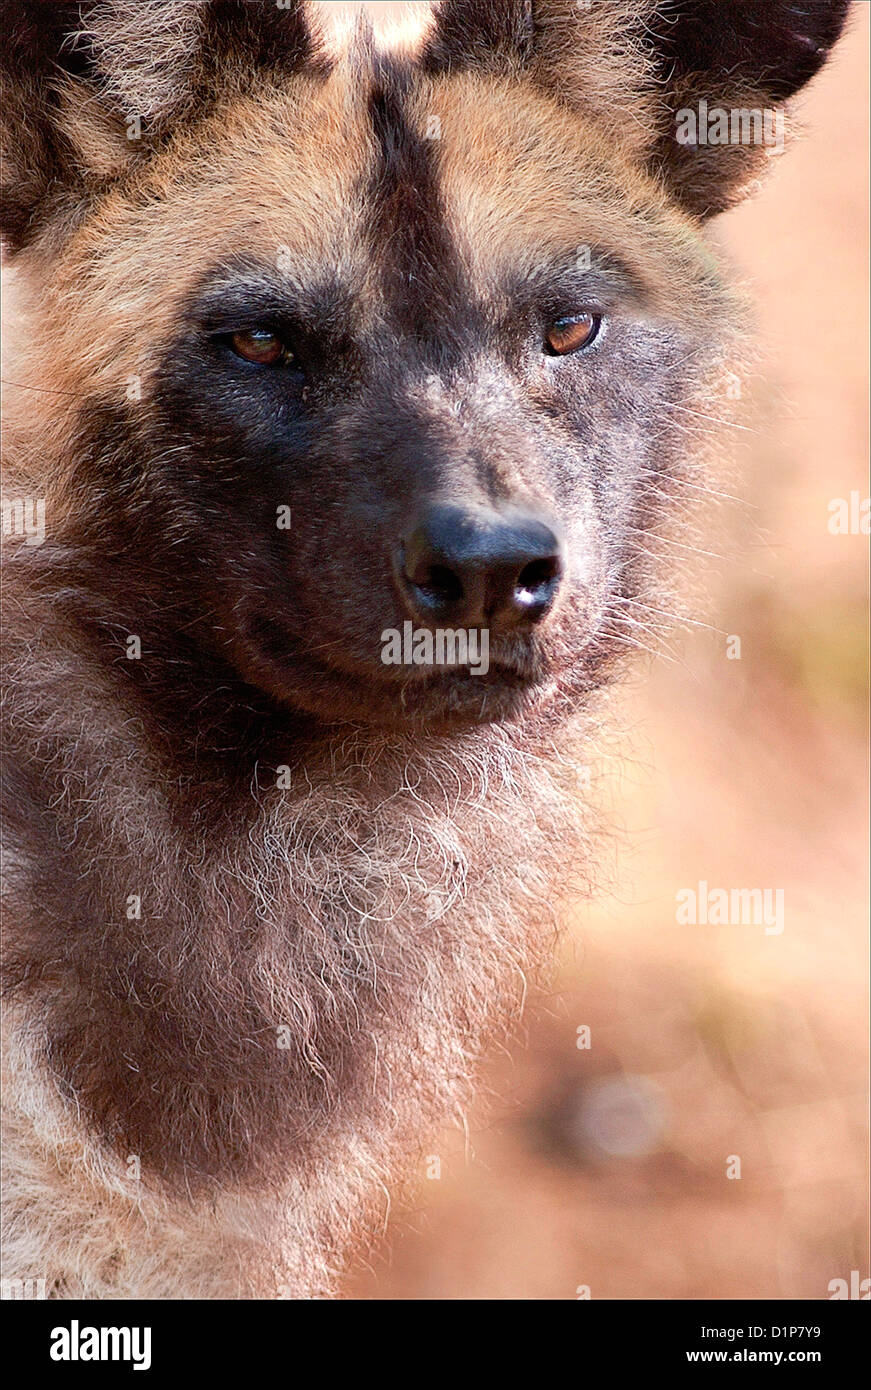 Lycaon pictus is a canine found only in Africa, especially in savannas and lightly wooded areas. Stock Photo